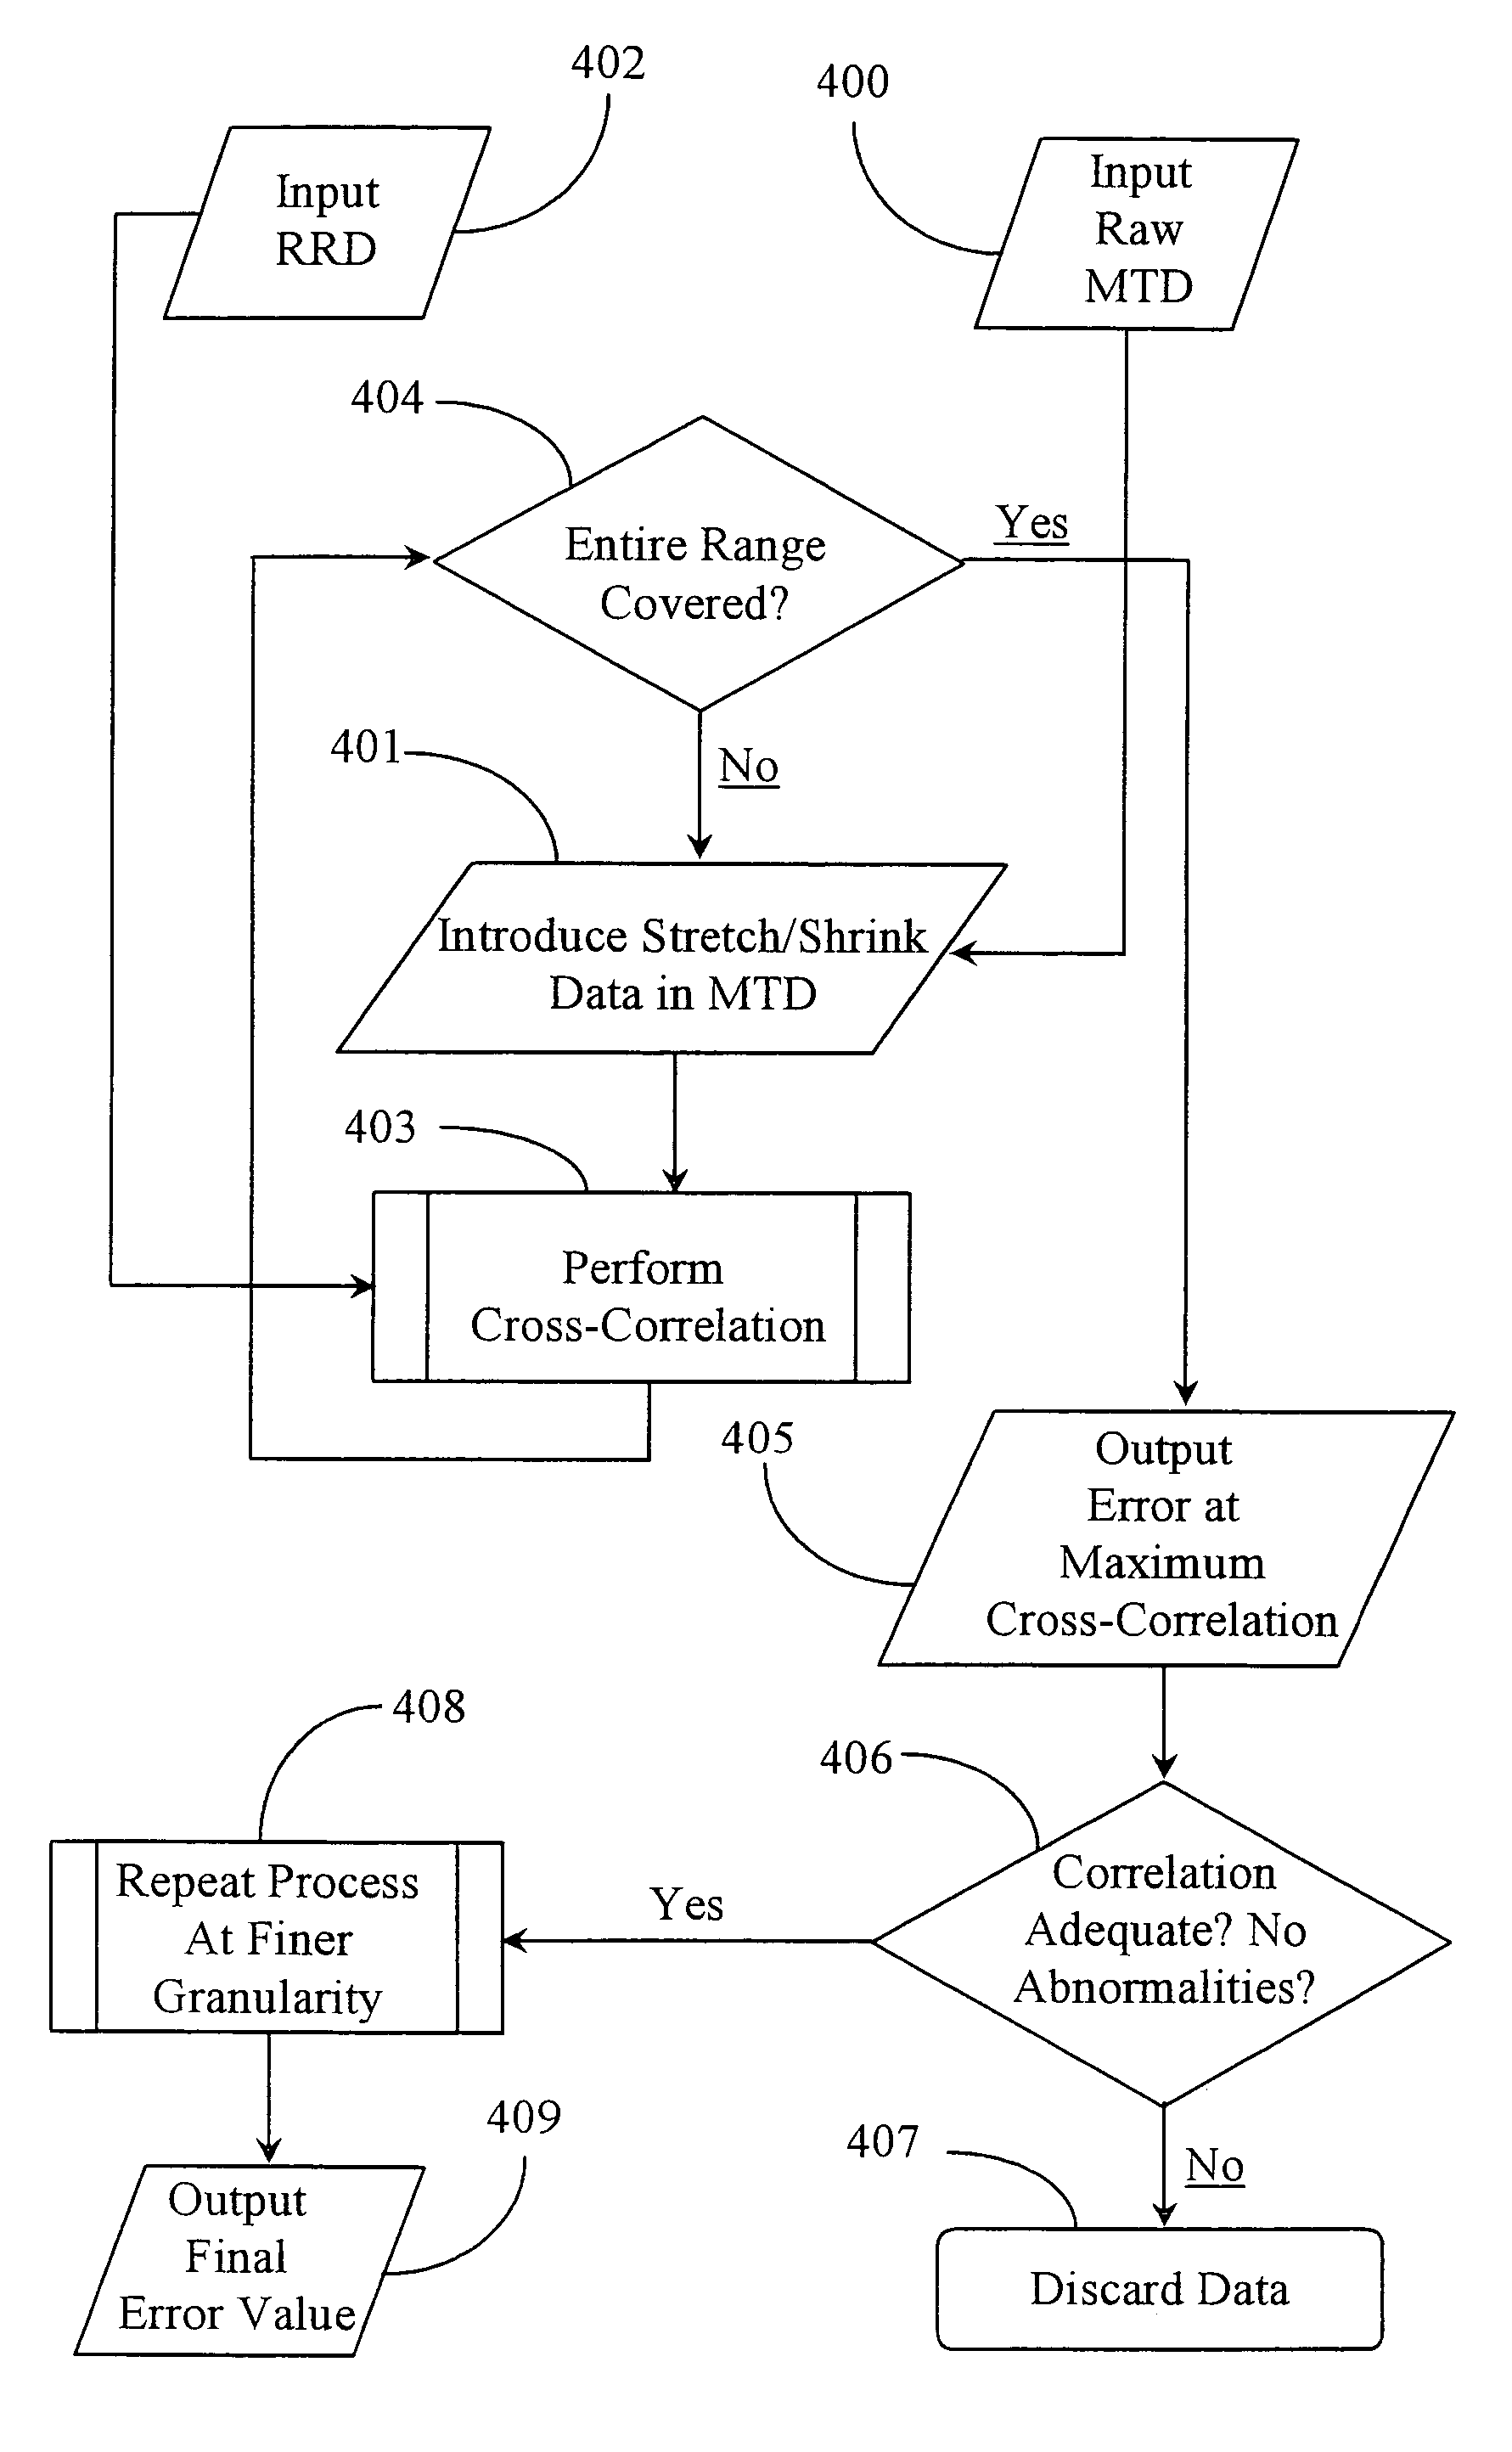 Methods for aligning measured data taken from specific rail track sections of a railroad with the correct geographic location of the sections